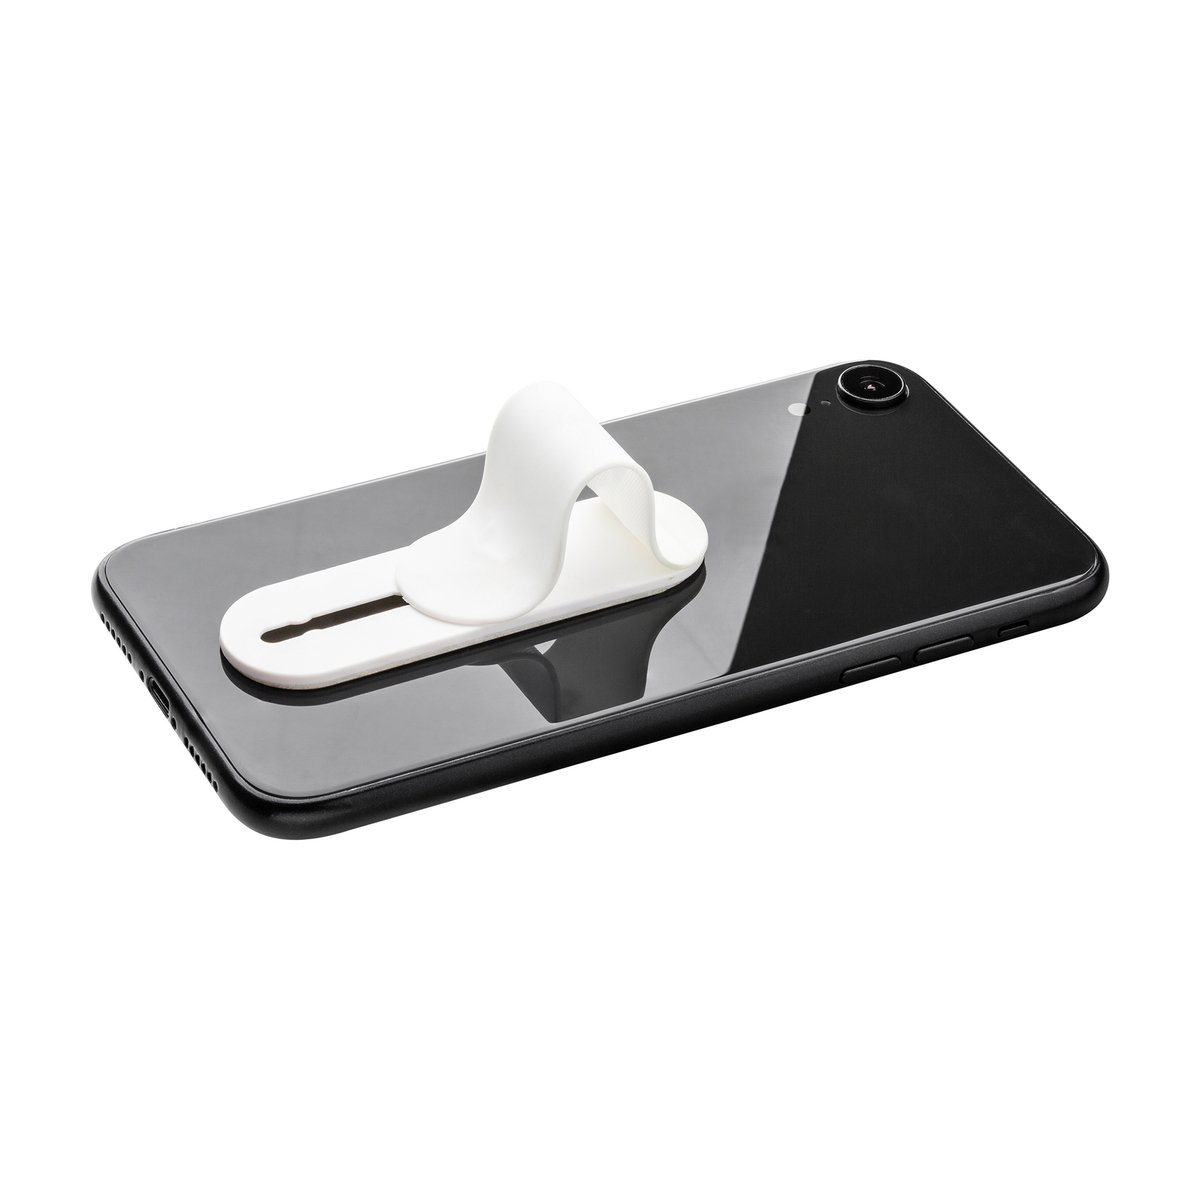 Mobile stand REEVES-FLIPSOCKET MOVE white